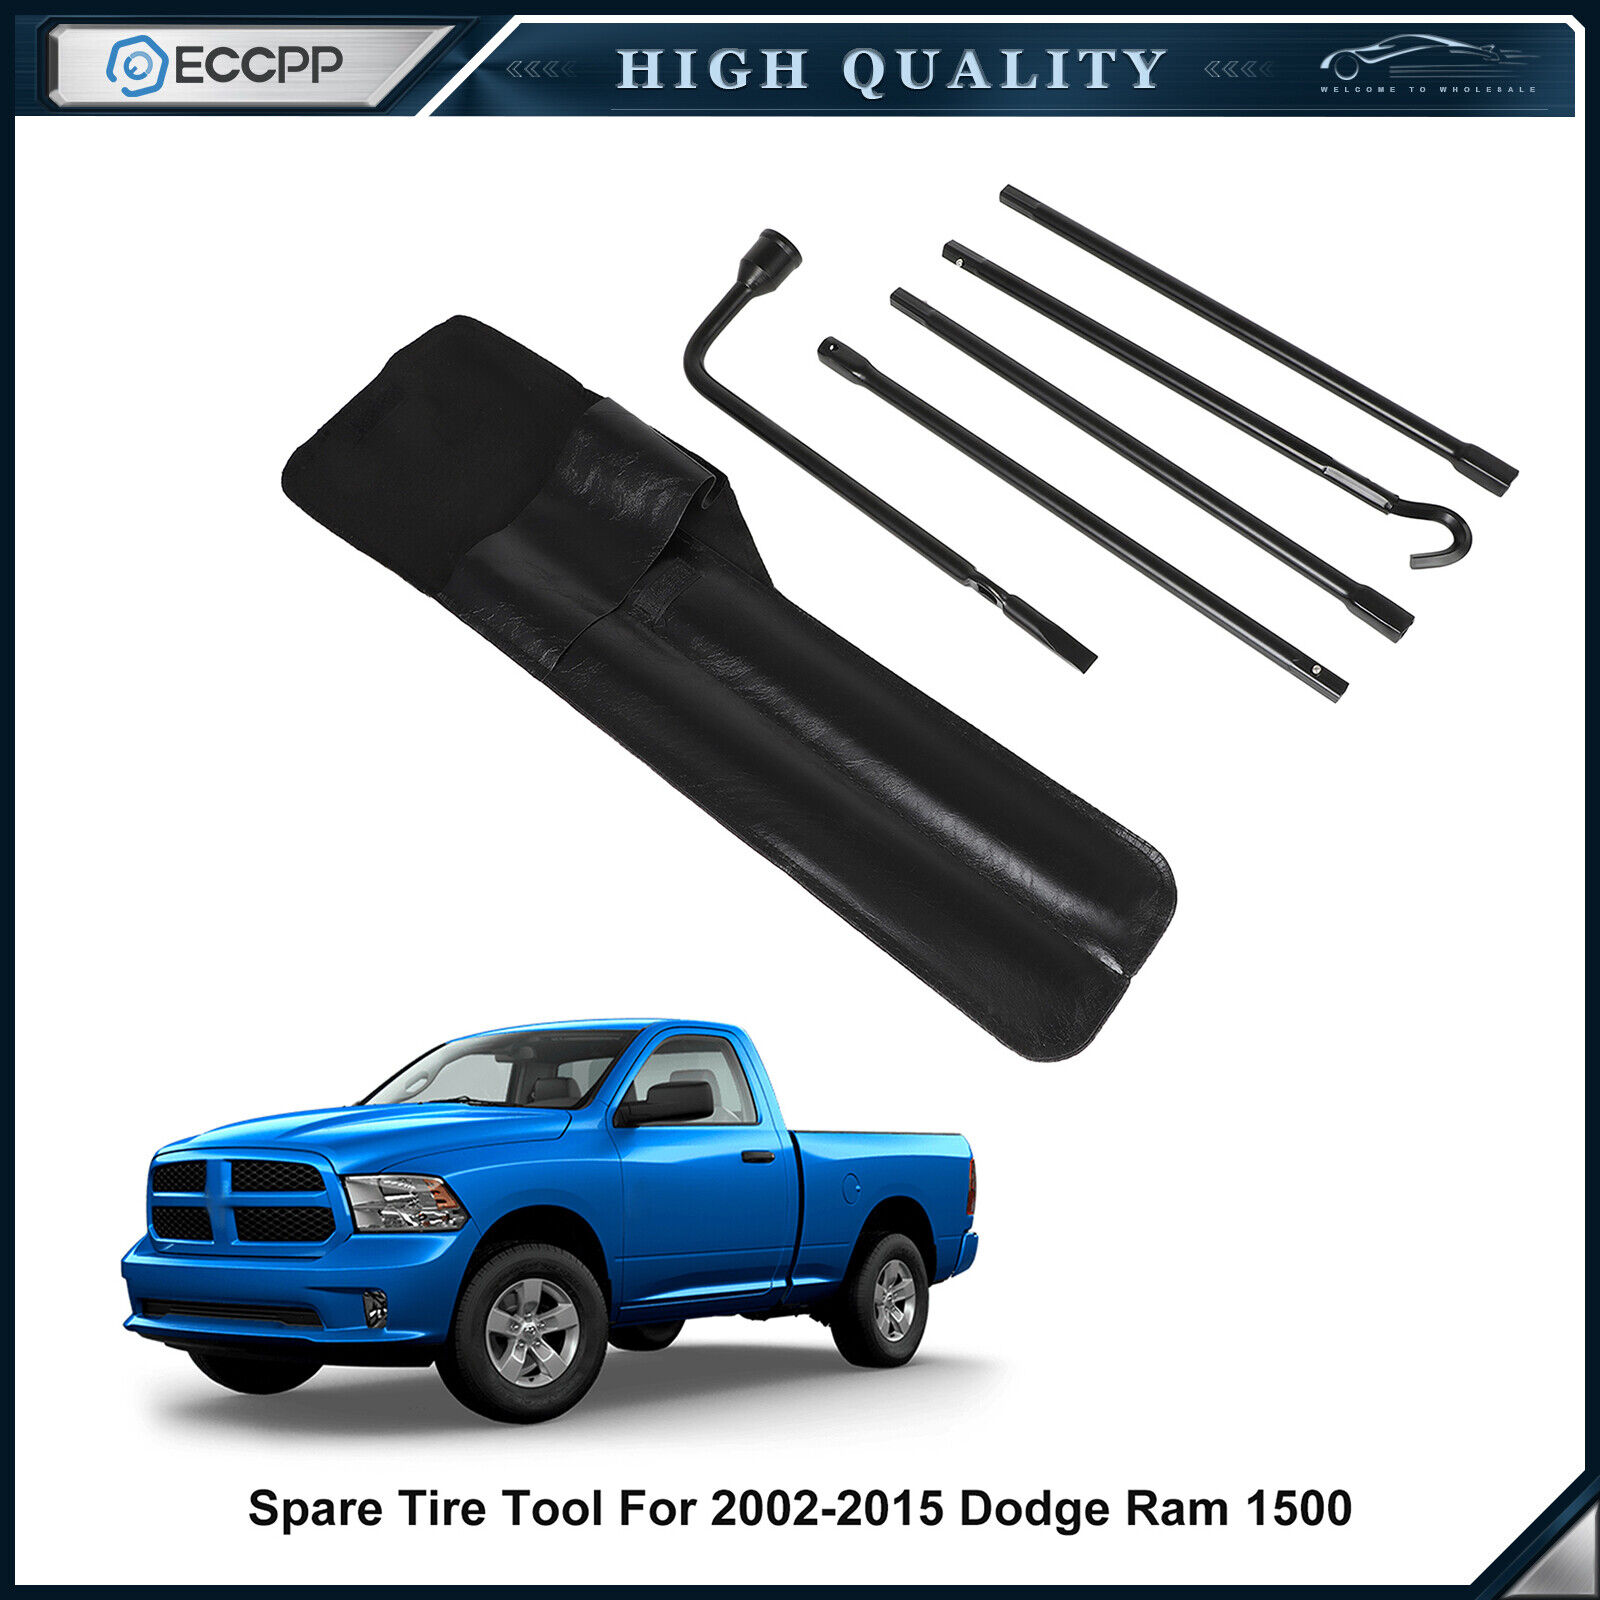 2002-15 for Dodge Ram 1500 Spare Tire Lug Wrench Tool Jack Replacement Set w/Bag